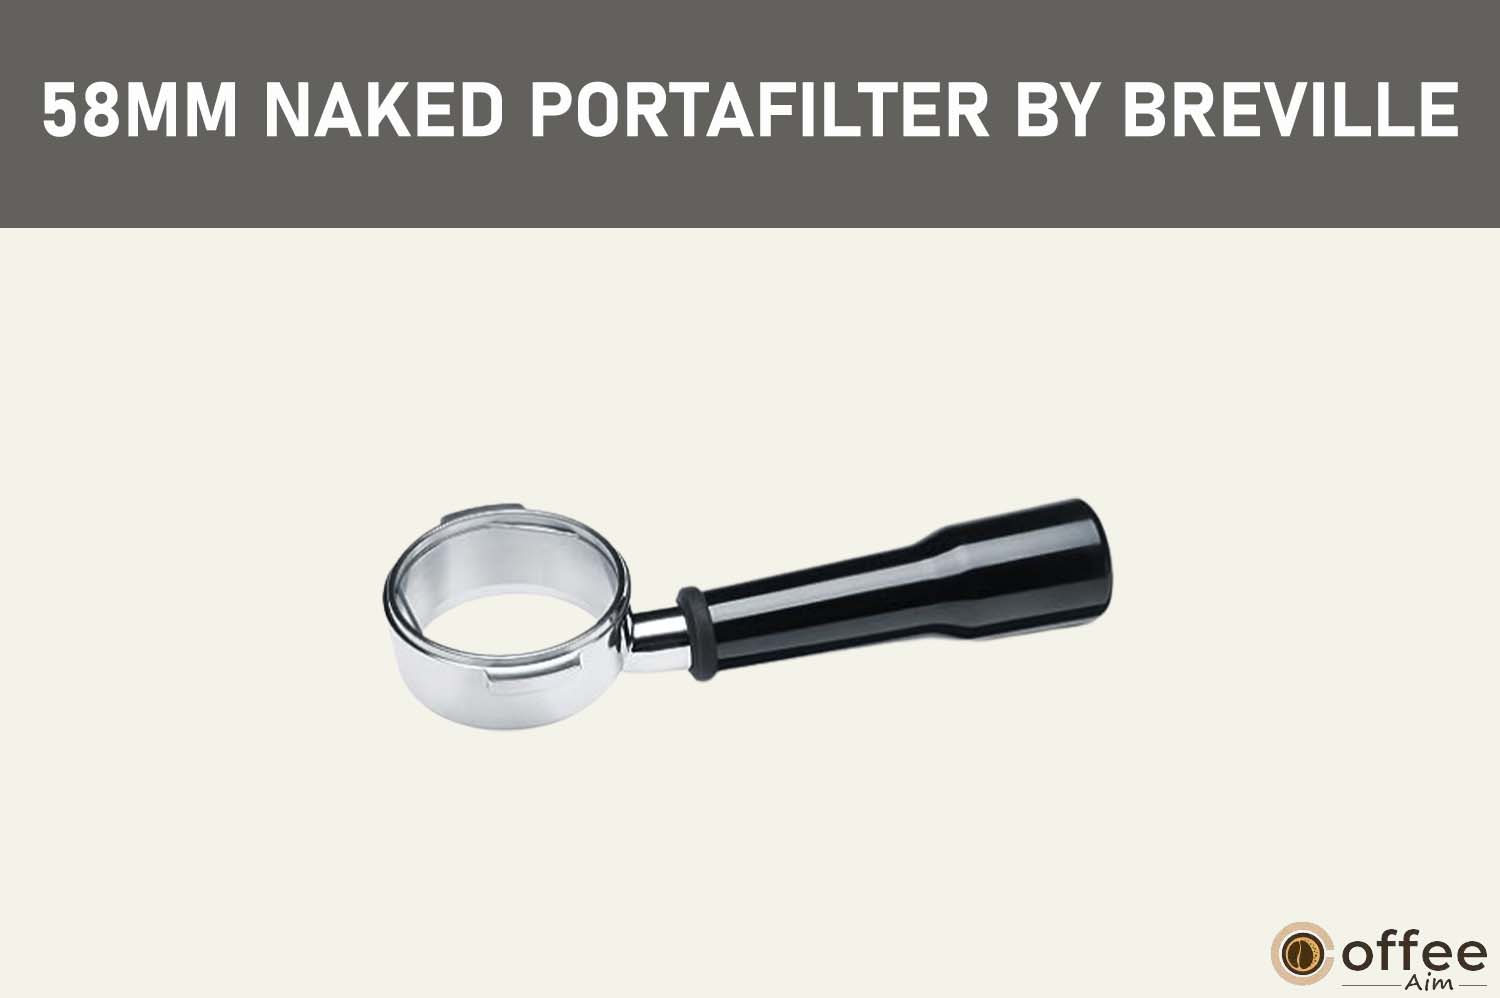 Feature image for the article "58mm Naked Portafilter By Breville"